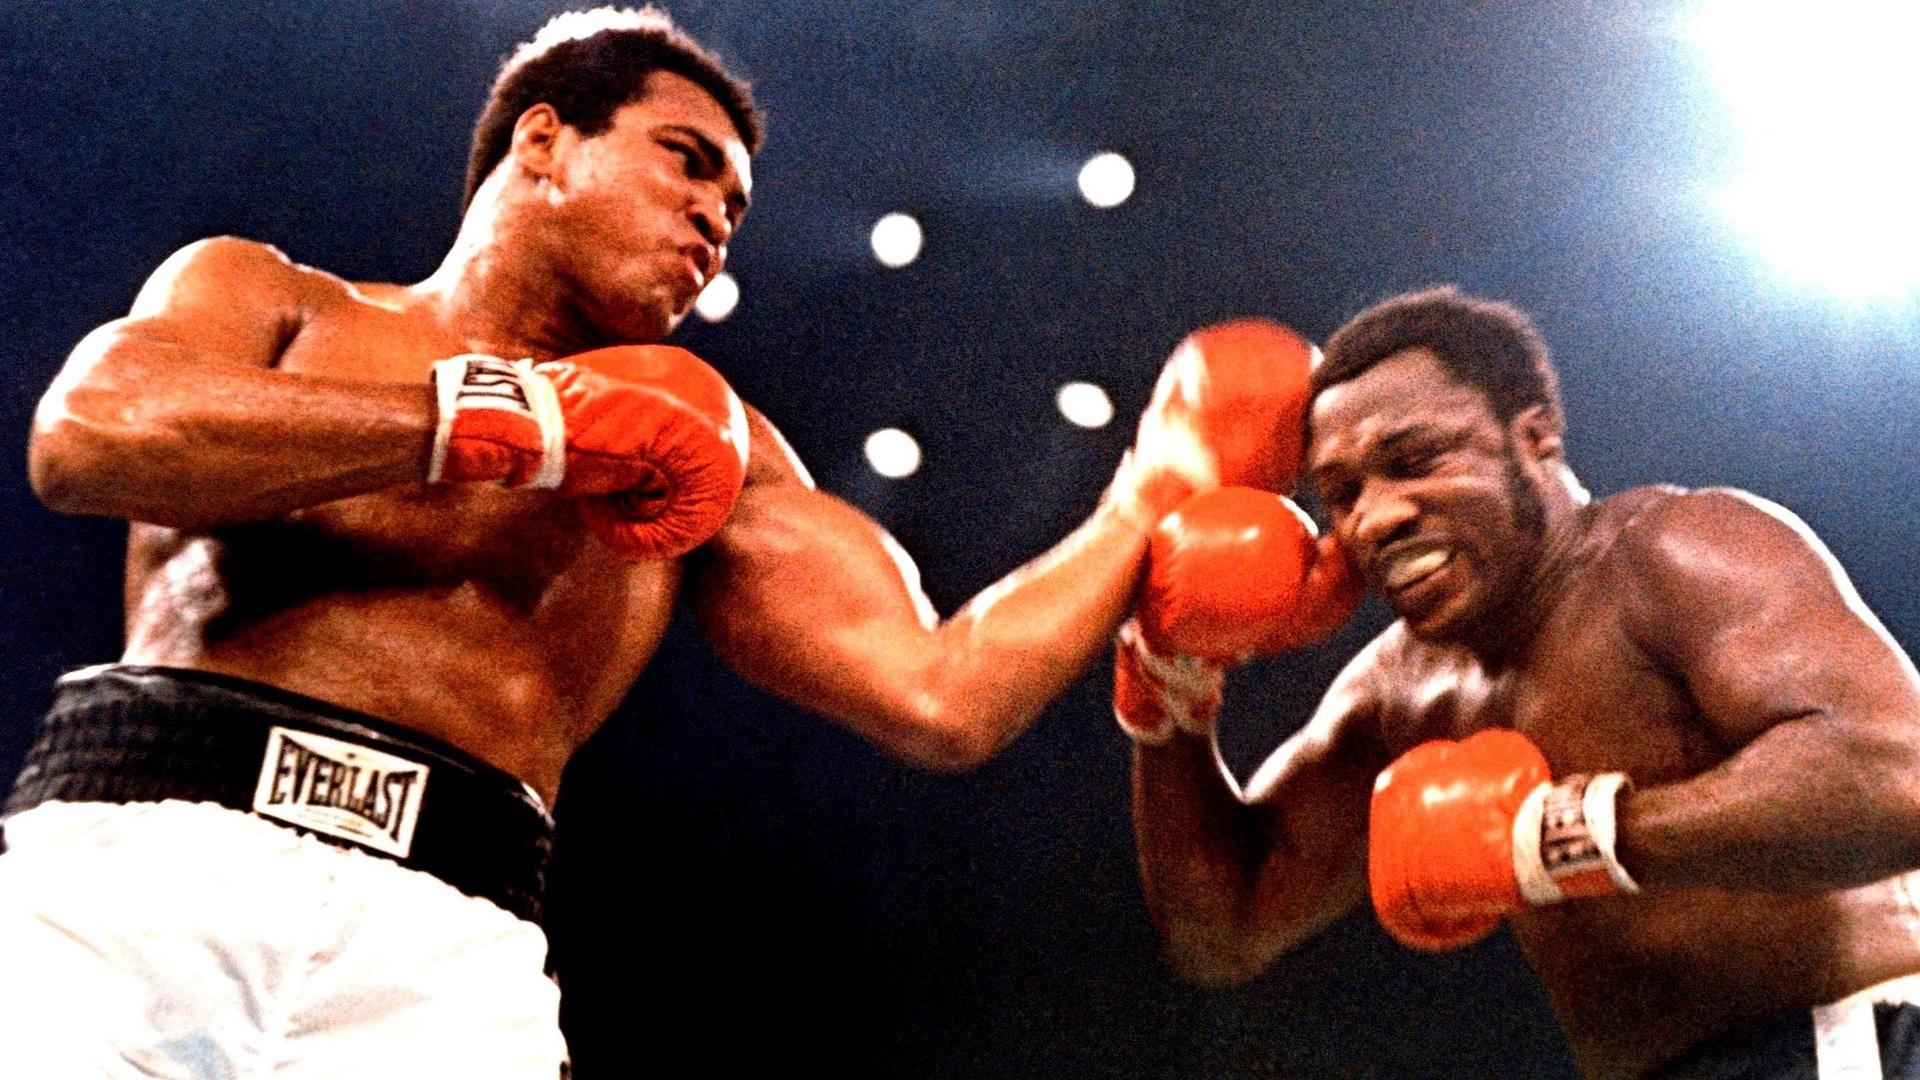 Ang Lee's Muhammad Ali and Joe Frazier 3D Boxing Film in Development